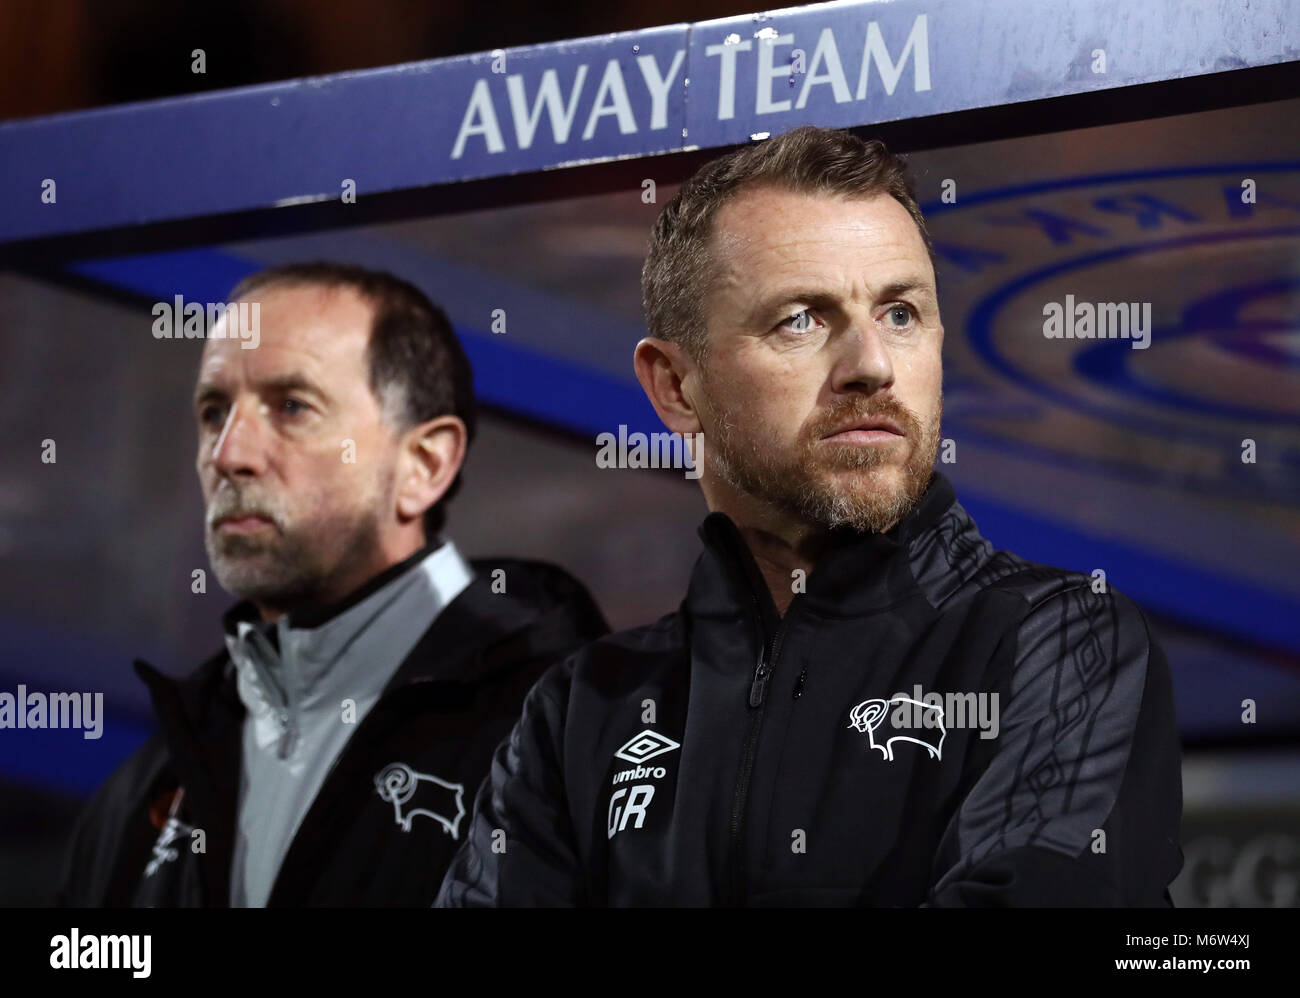 Derby County manager Gary Rowett (right) and assistant Kevin Summerfield during the Sky Bet Championship match at Loftus Road, London. PRESS ASSOCIATION Photo. Picture date: Tuesday March 6, 2018. See PA story SOCCER QPR. Photo credit should read: Tim Goode/PA Wire. RESTRICTIONS: No use with unauthorised audio, video, data, fixture lists, club/league logos or 'live' services. Online in-match use limited to 75 images, no video emulation. No use in betting, games or single club/league/player publications. Stock Photo